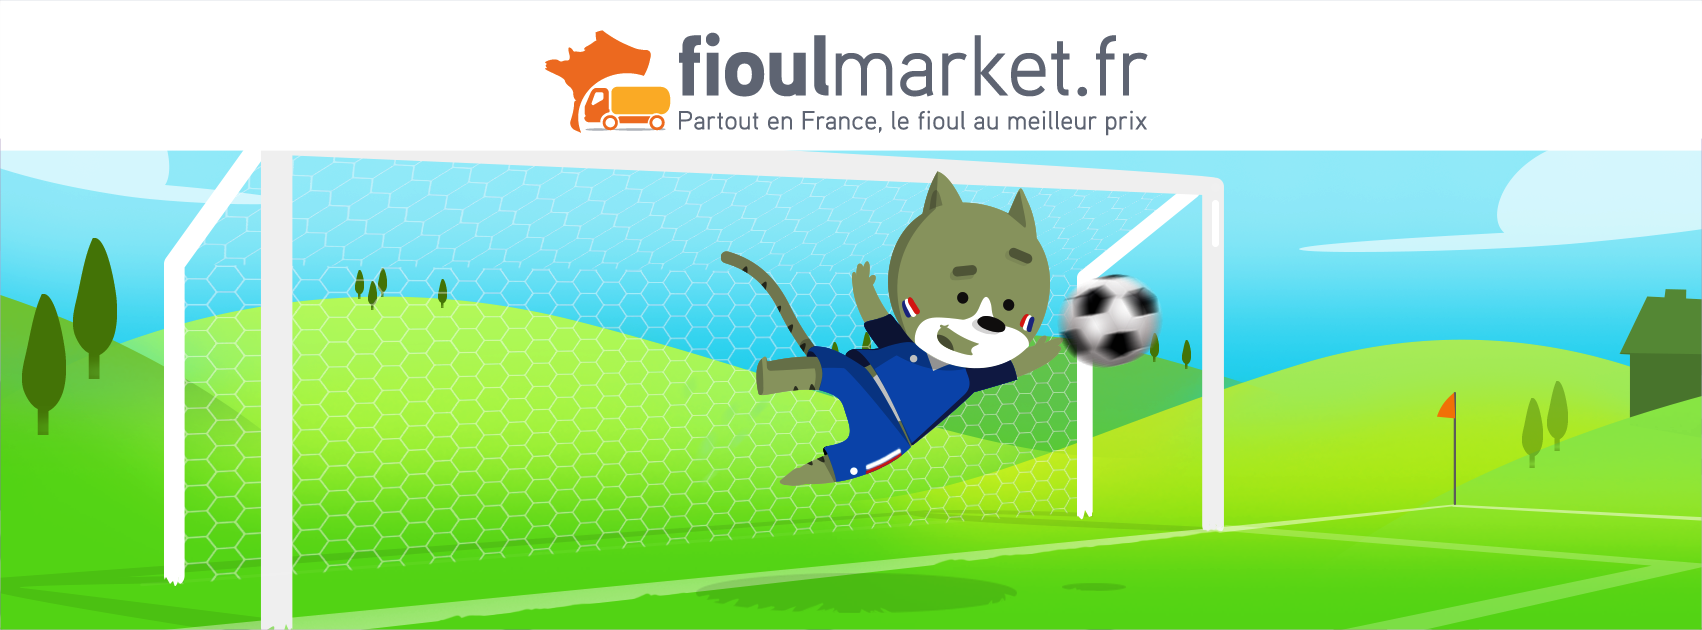 Coupe d'Europe Fioulmarket